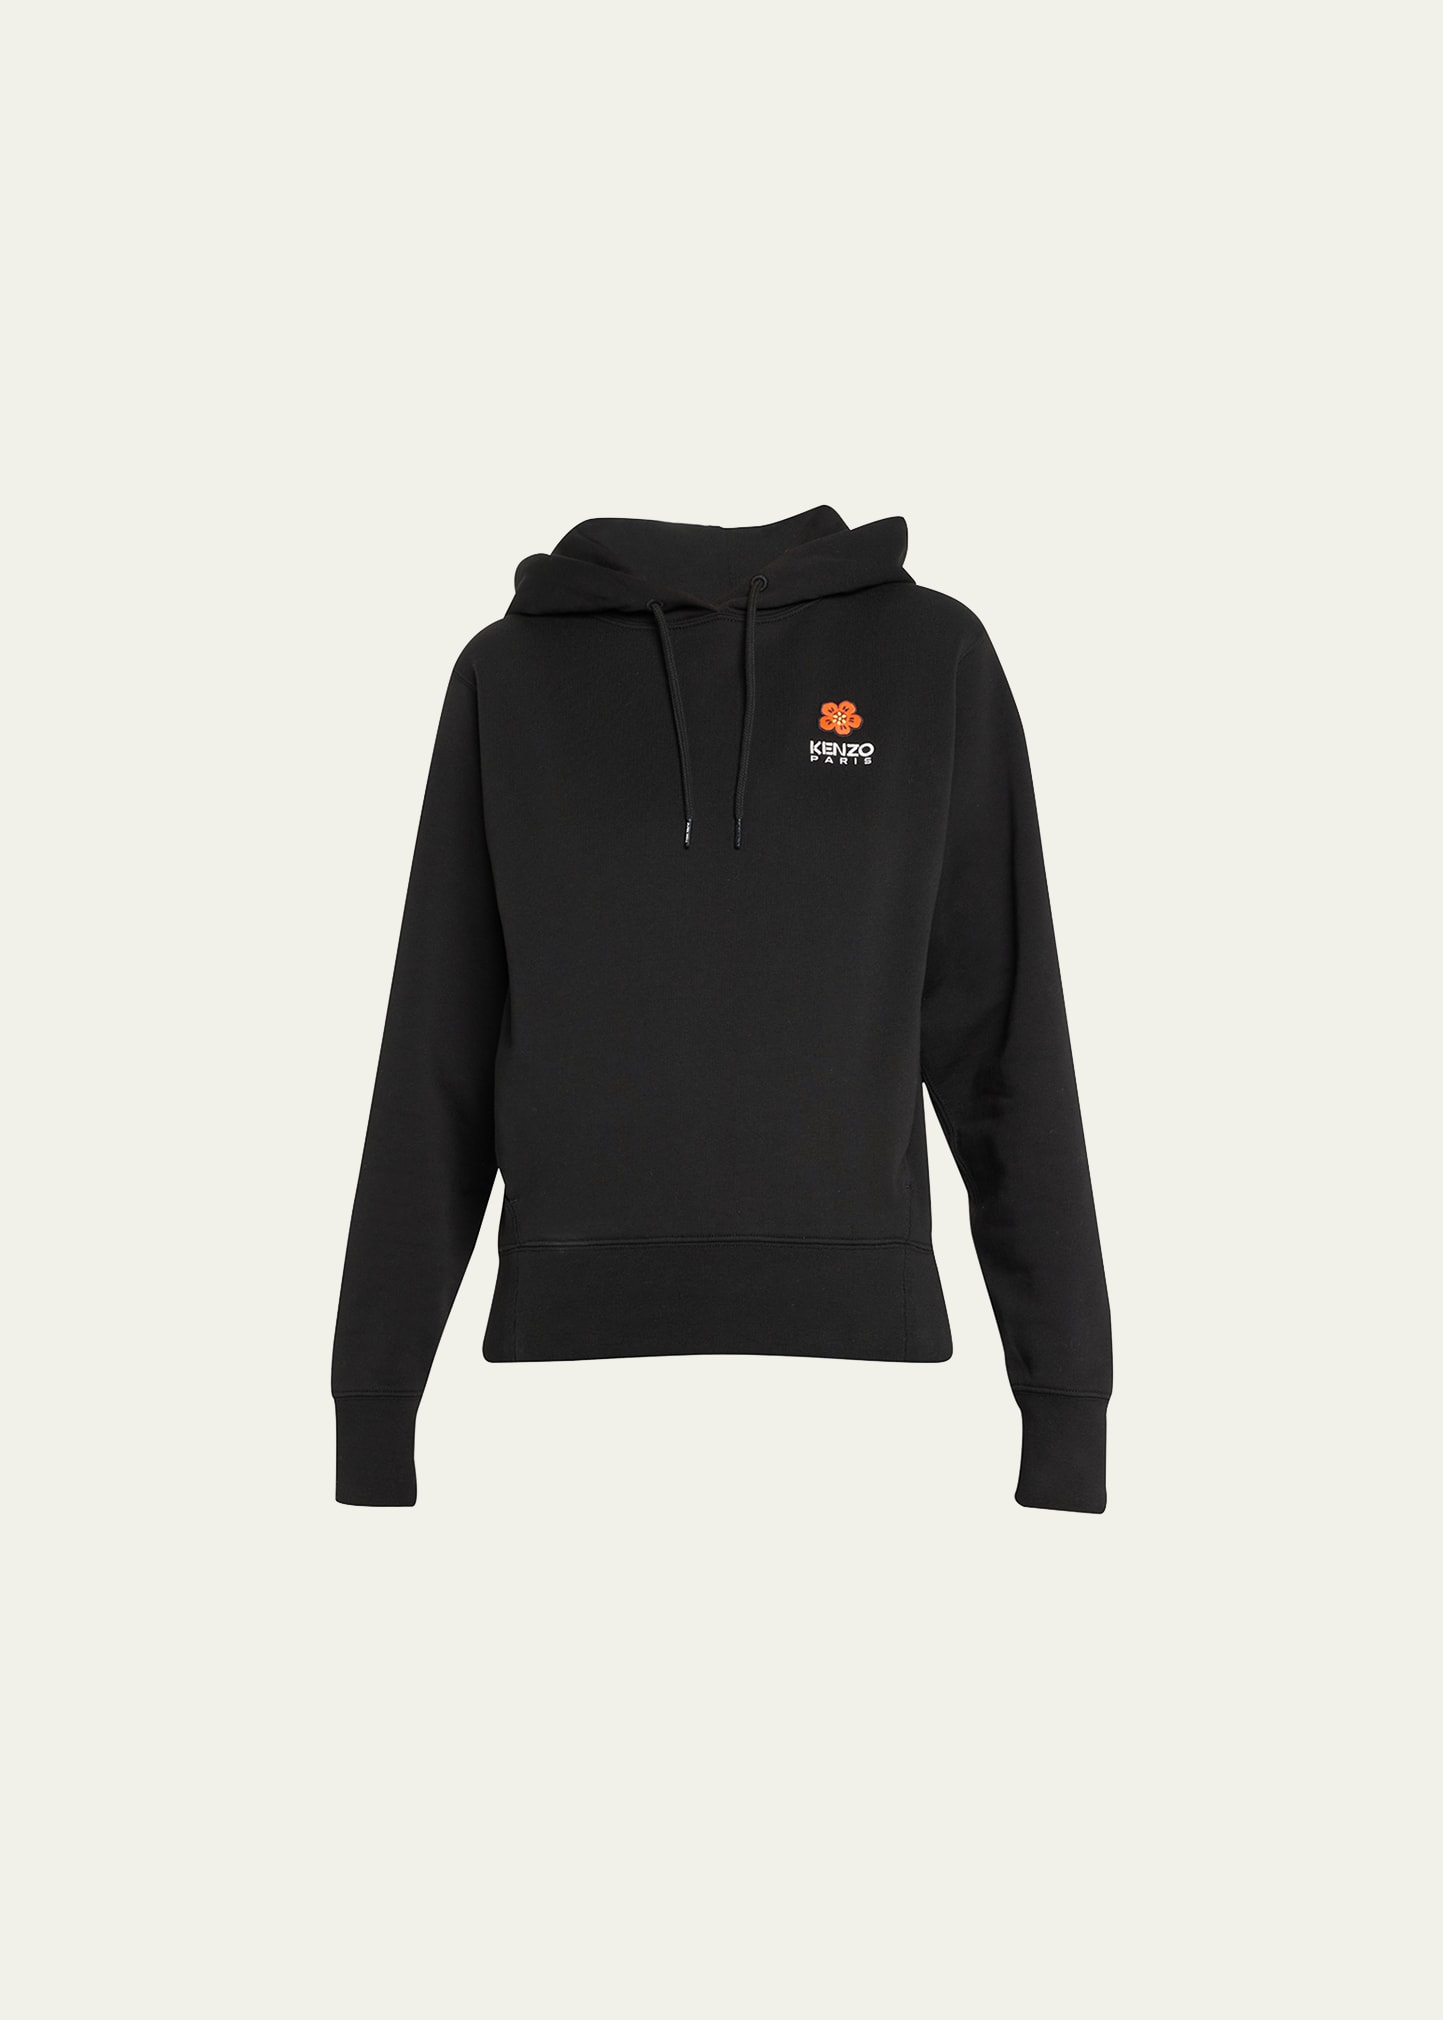 Embroidered Crest Logo Hoodie